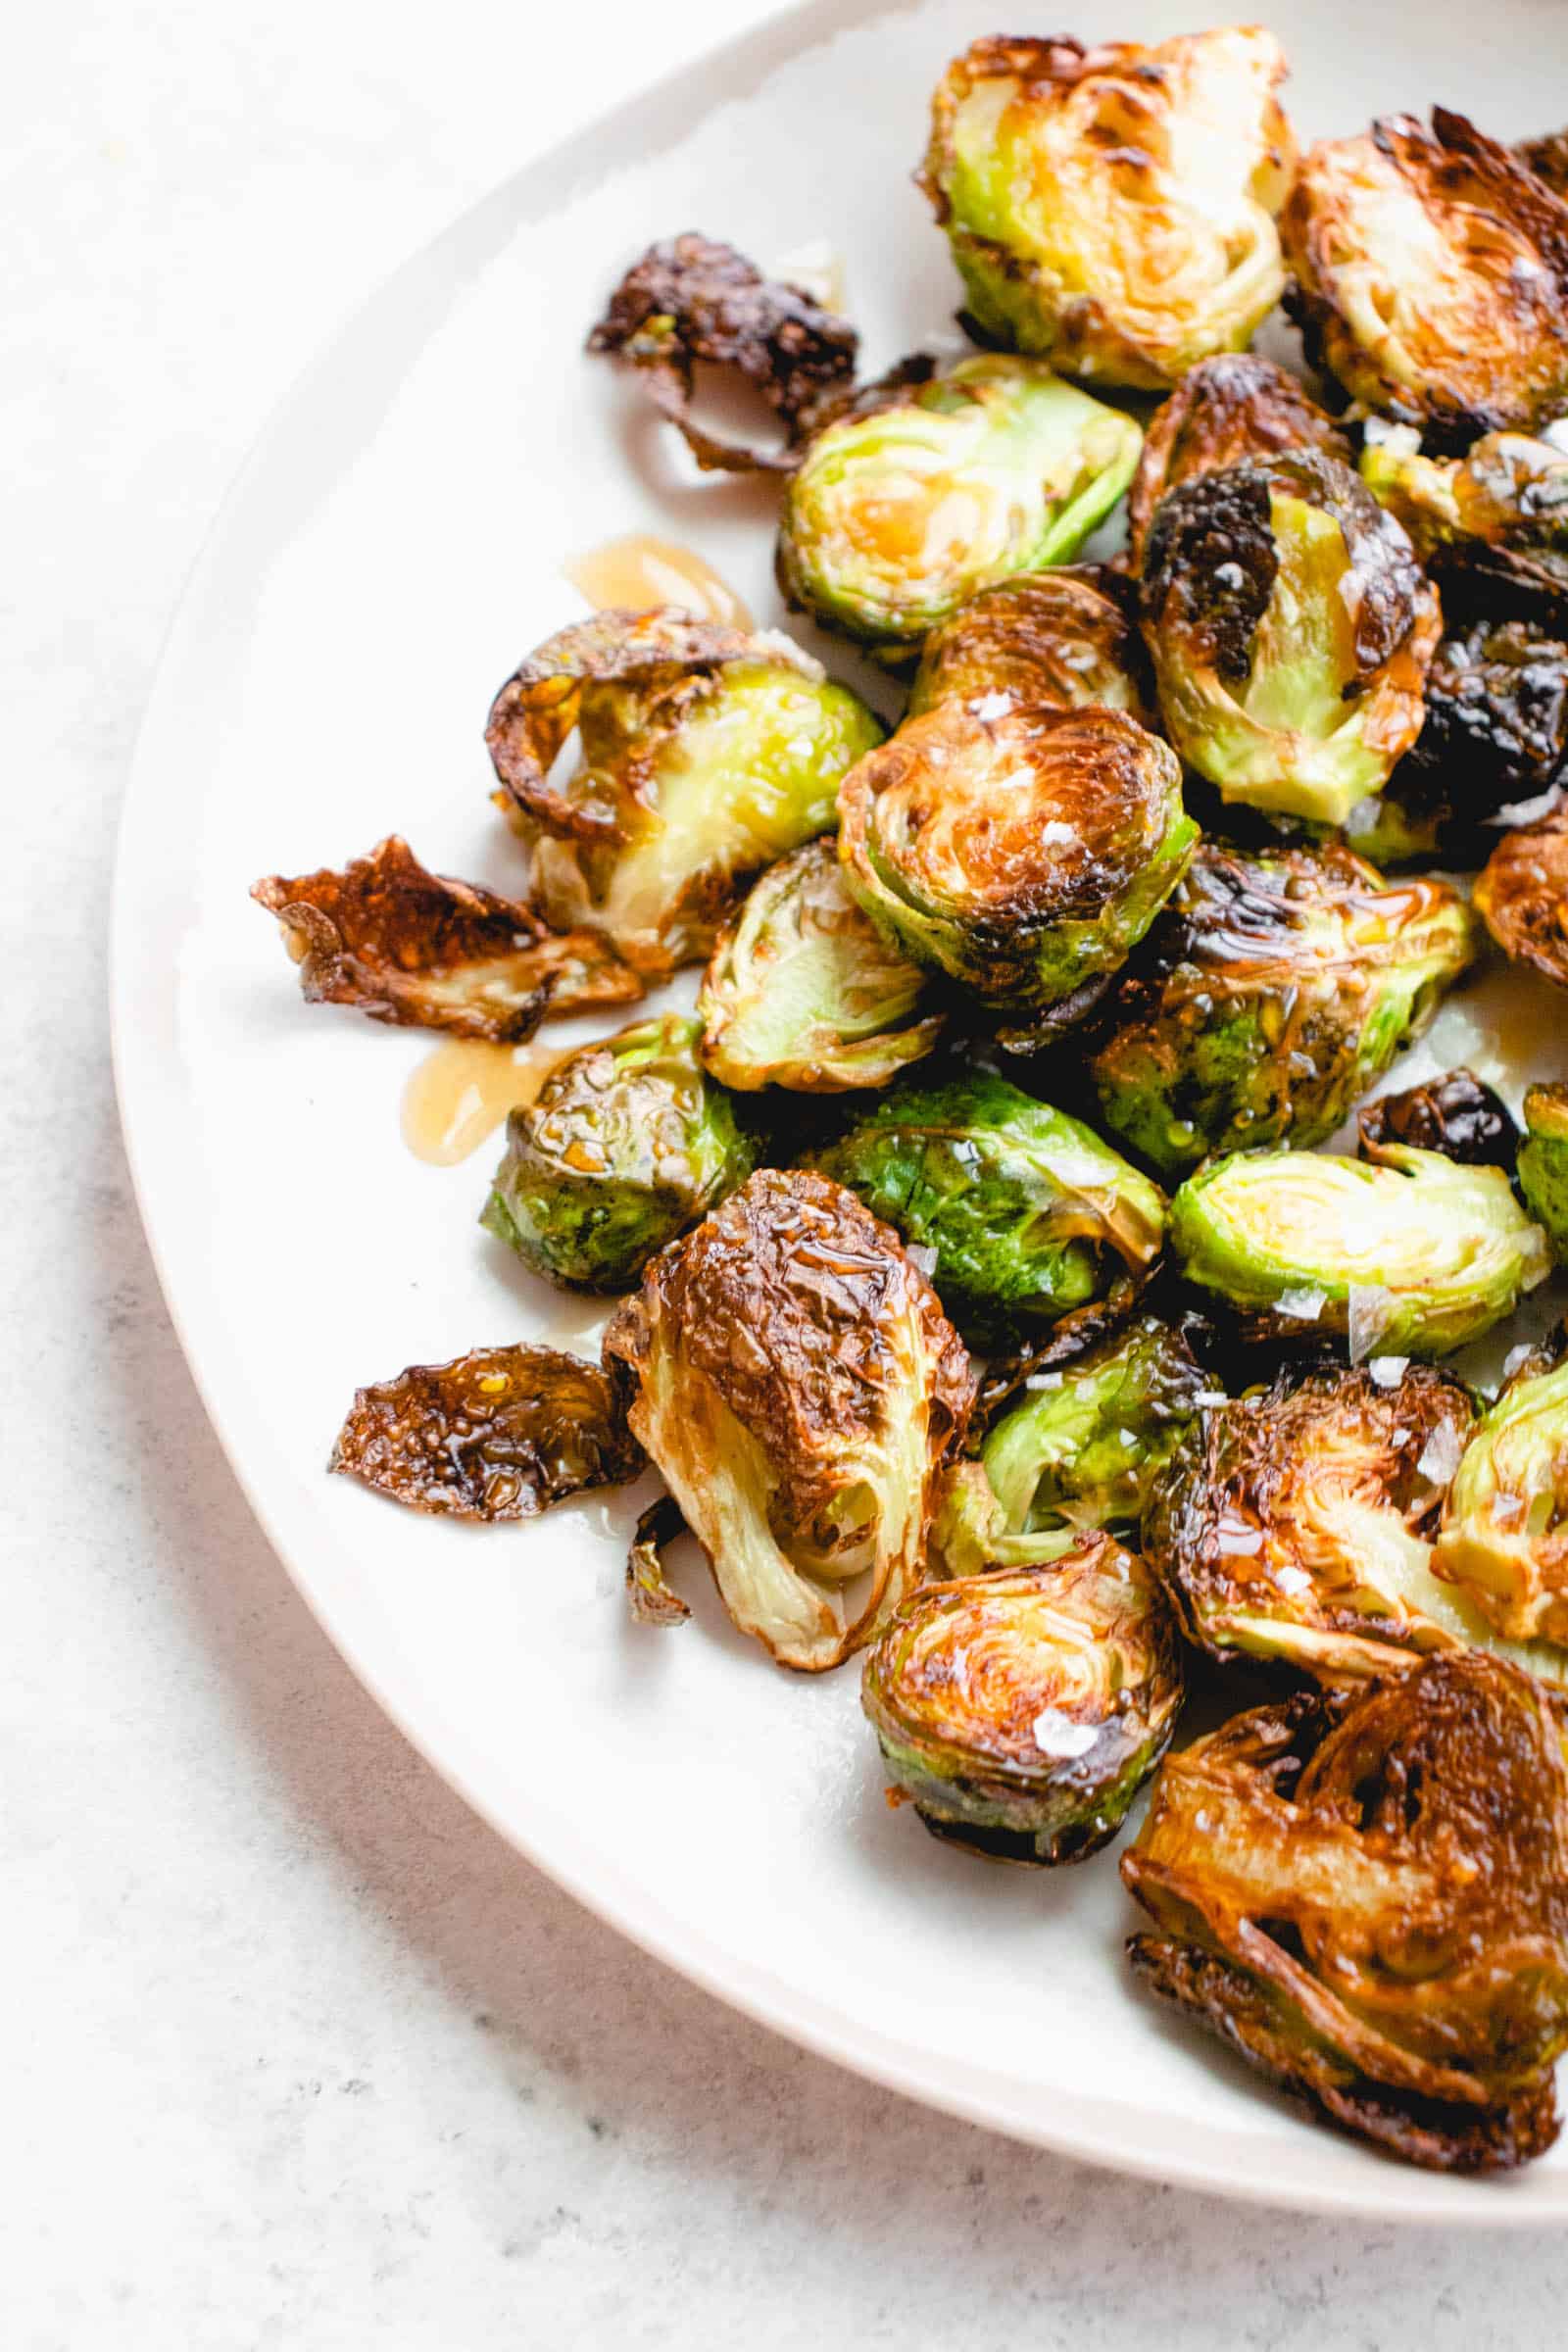 Easy Teriyaki Maple Glazed Brussels Sprouts 😋 #brusselsprouts #brusse